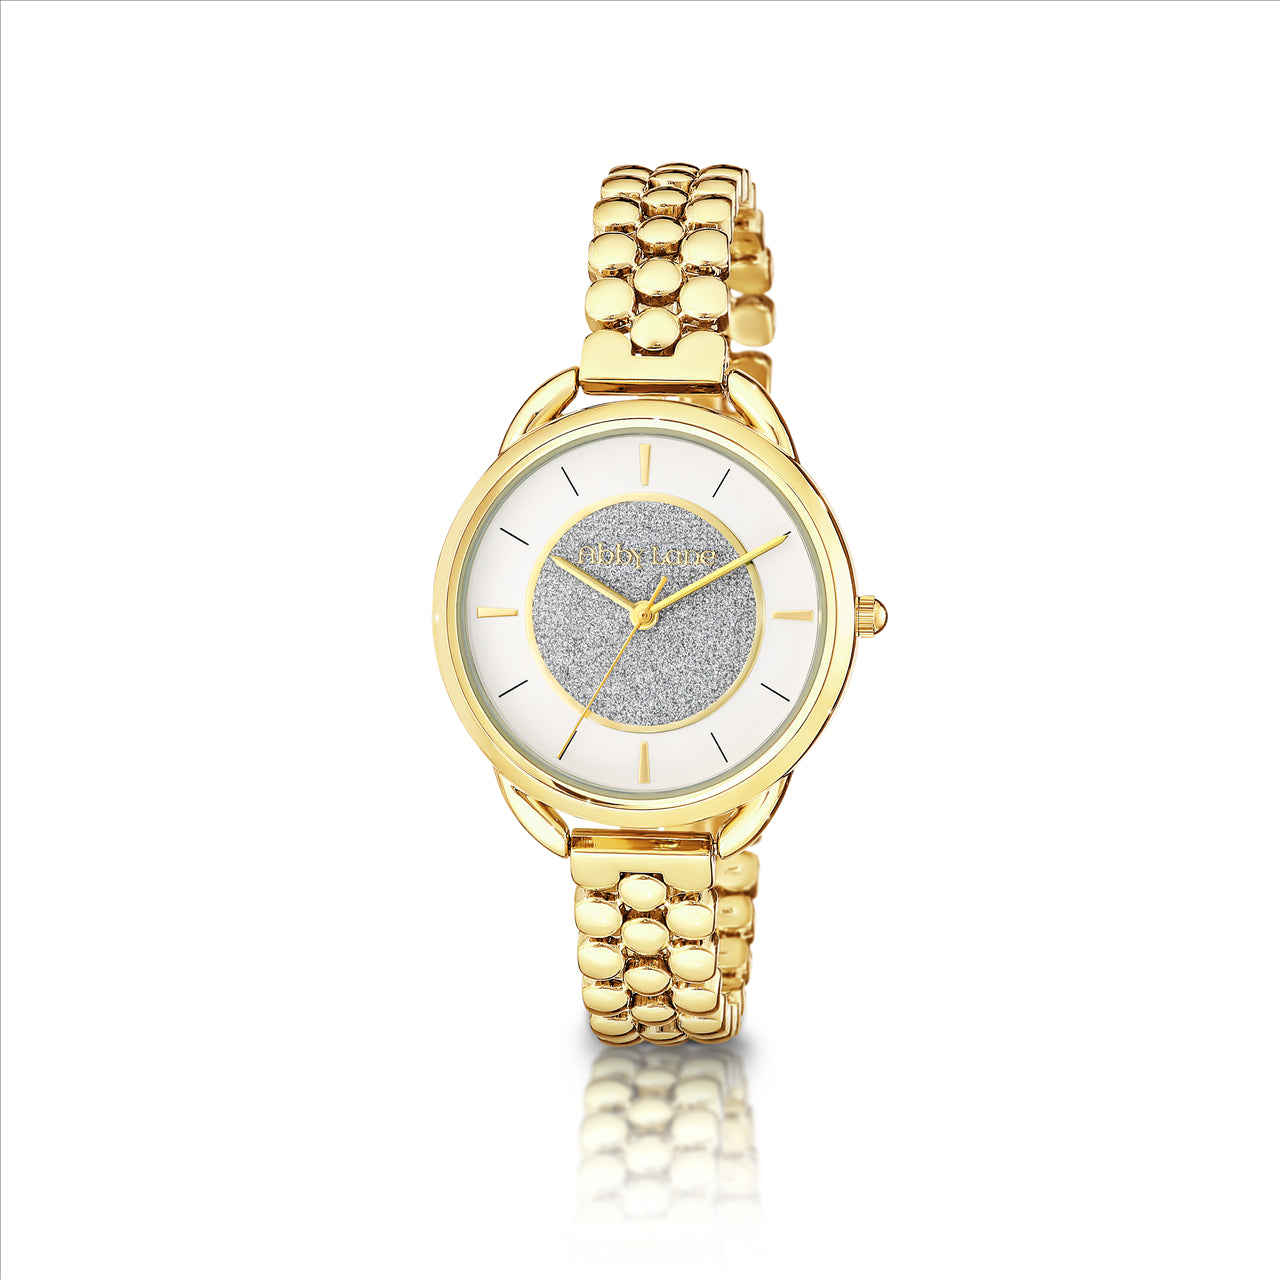 Abby lane victoria goldtone case. silver sparkle inner dial with gold accents. goldtone bracelet. case size 35mm